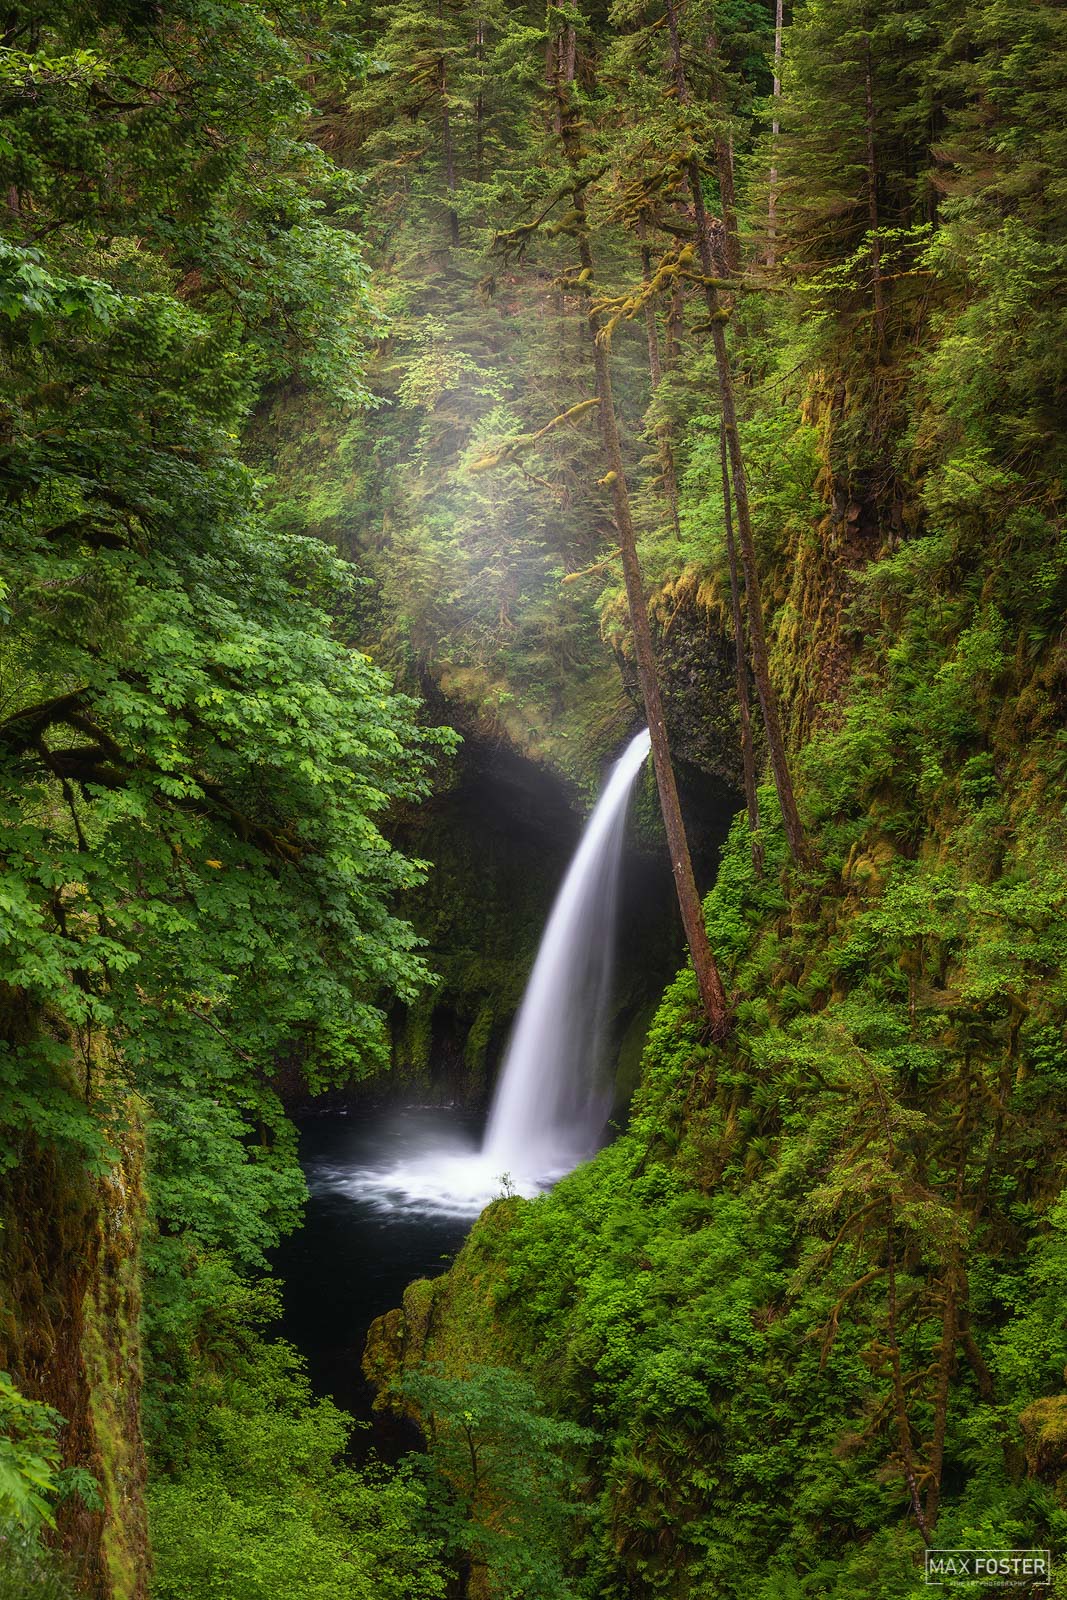 Bring nature into your home with Fairy Tail, Max Foster's limited edition photography print of Metlako Falls in Oregon from his...